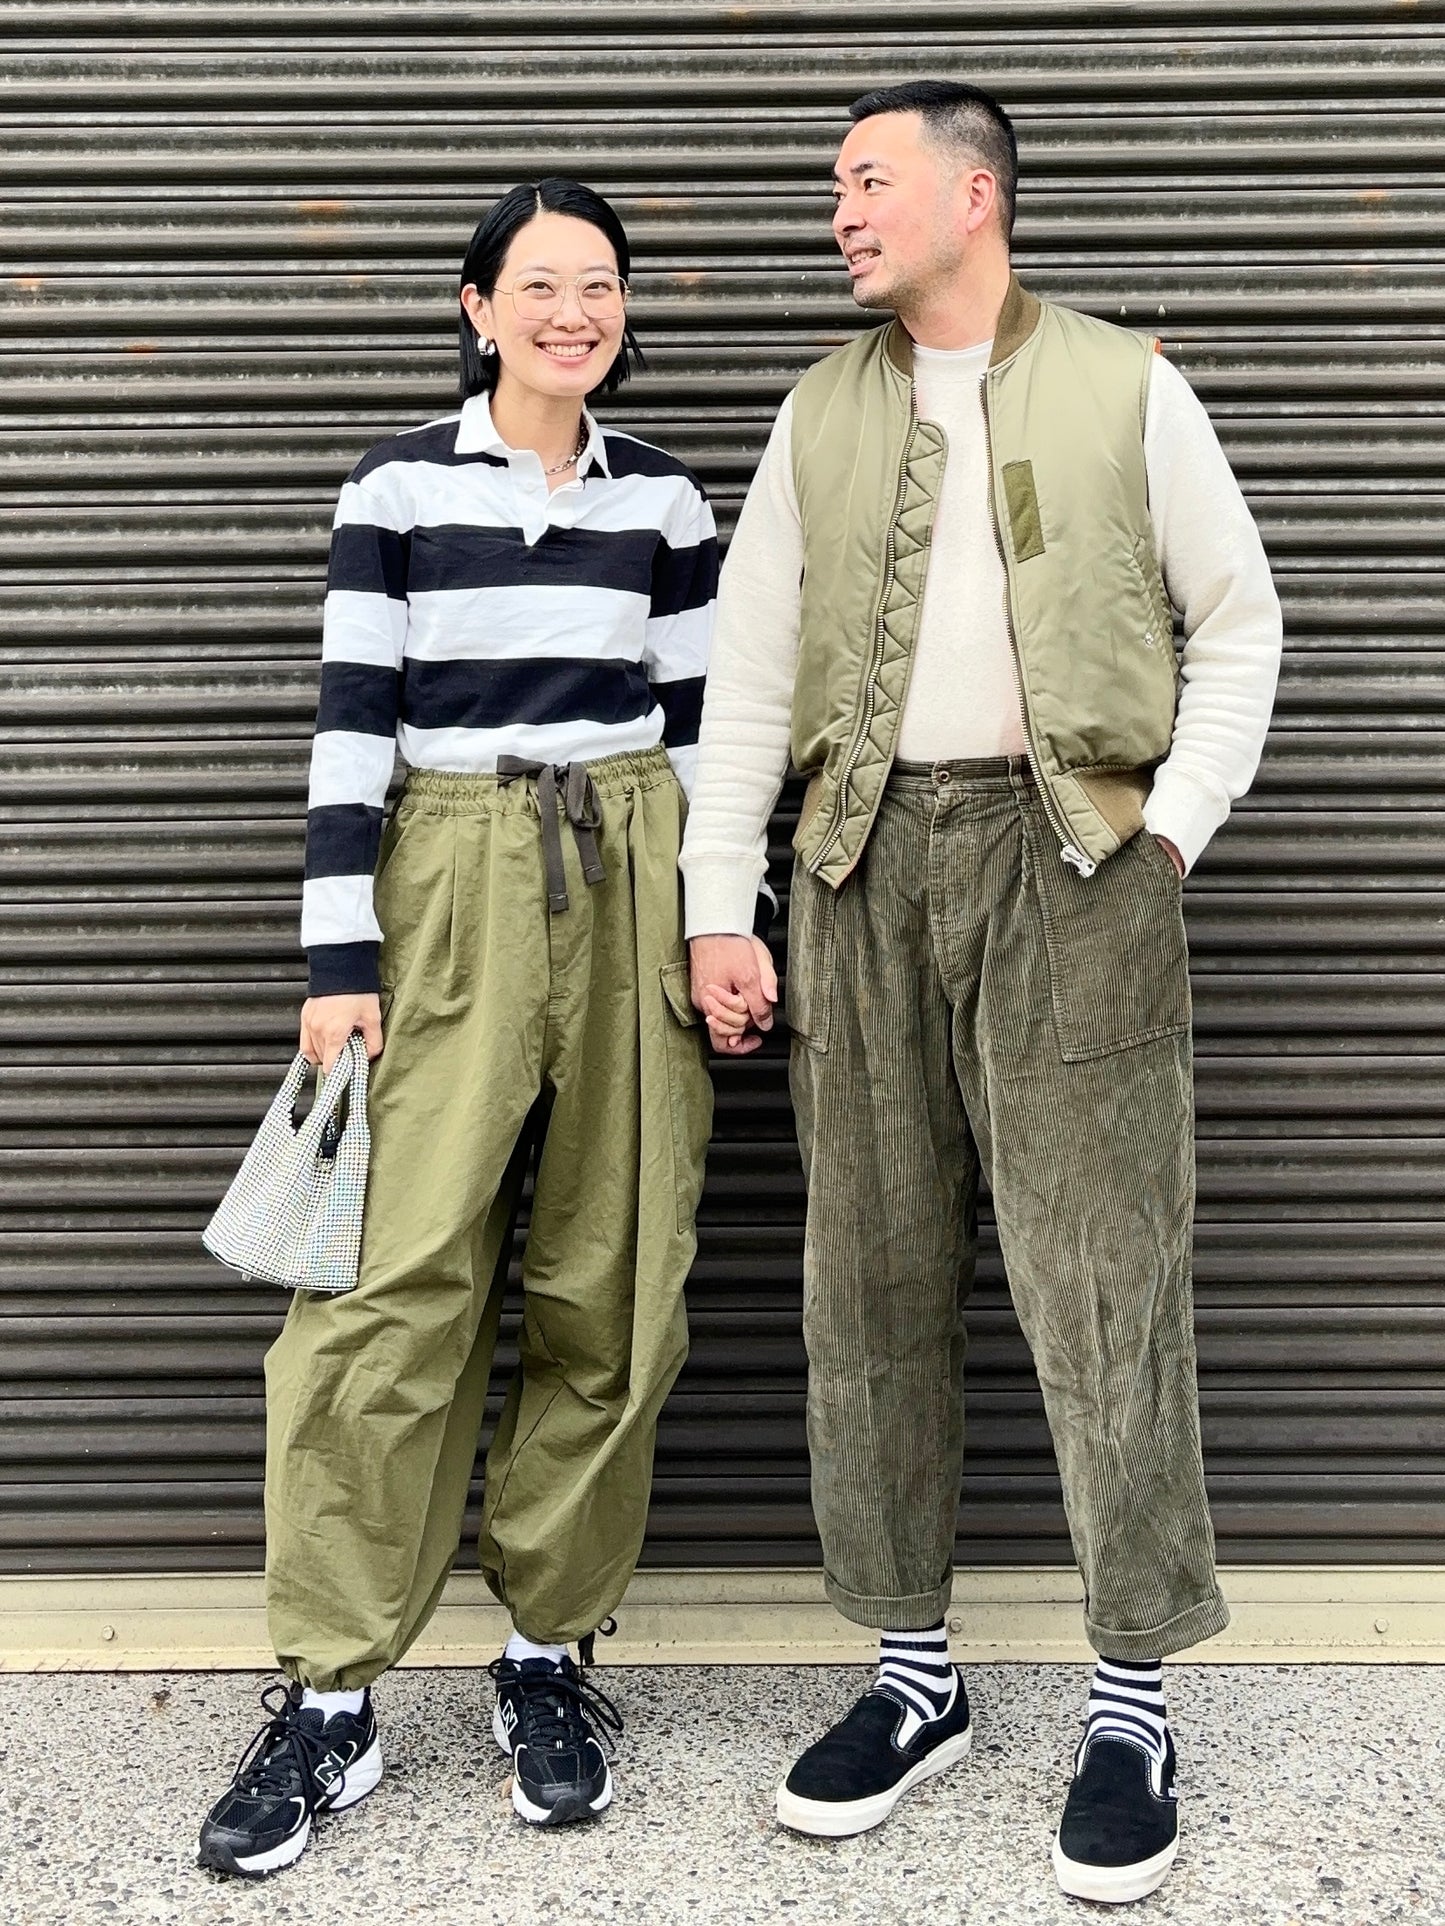 Amy MILITARY CARGO PANTS UNISEX【SELECTED ITEM】★Early bird 5% off until March 2.9 PM